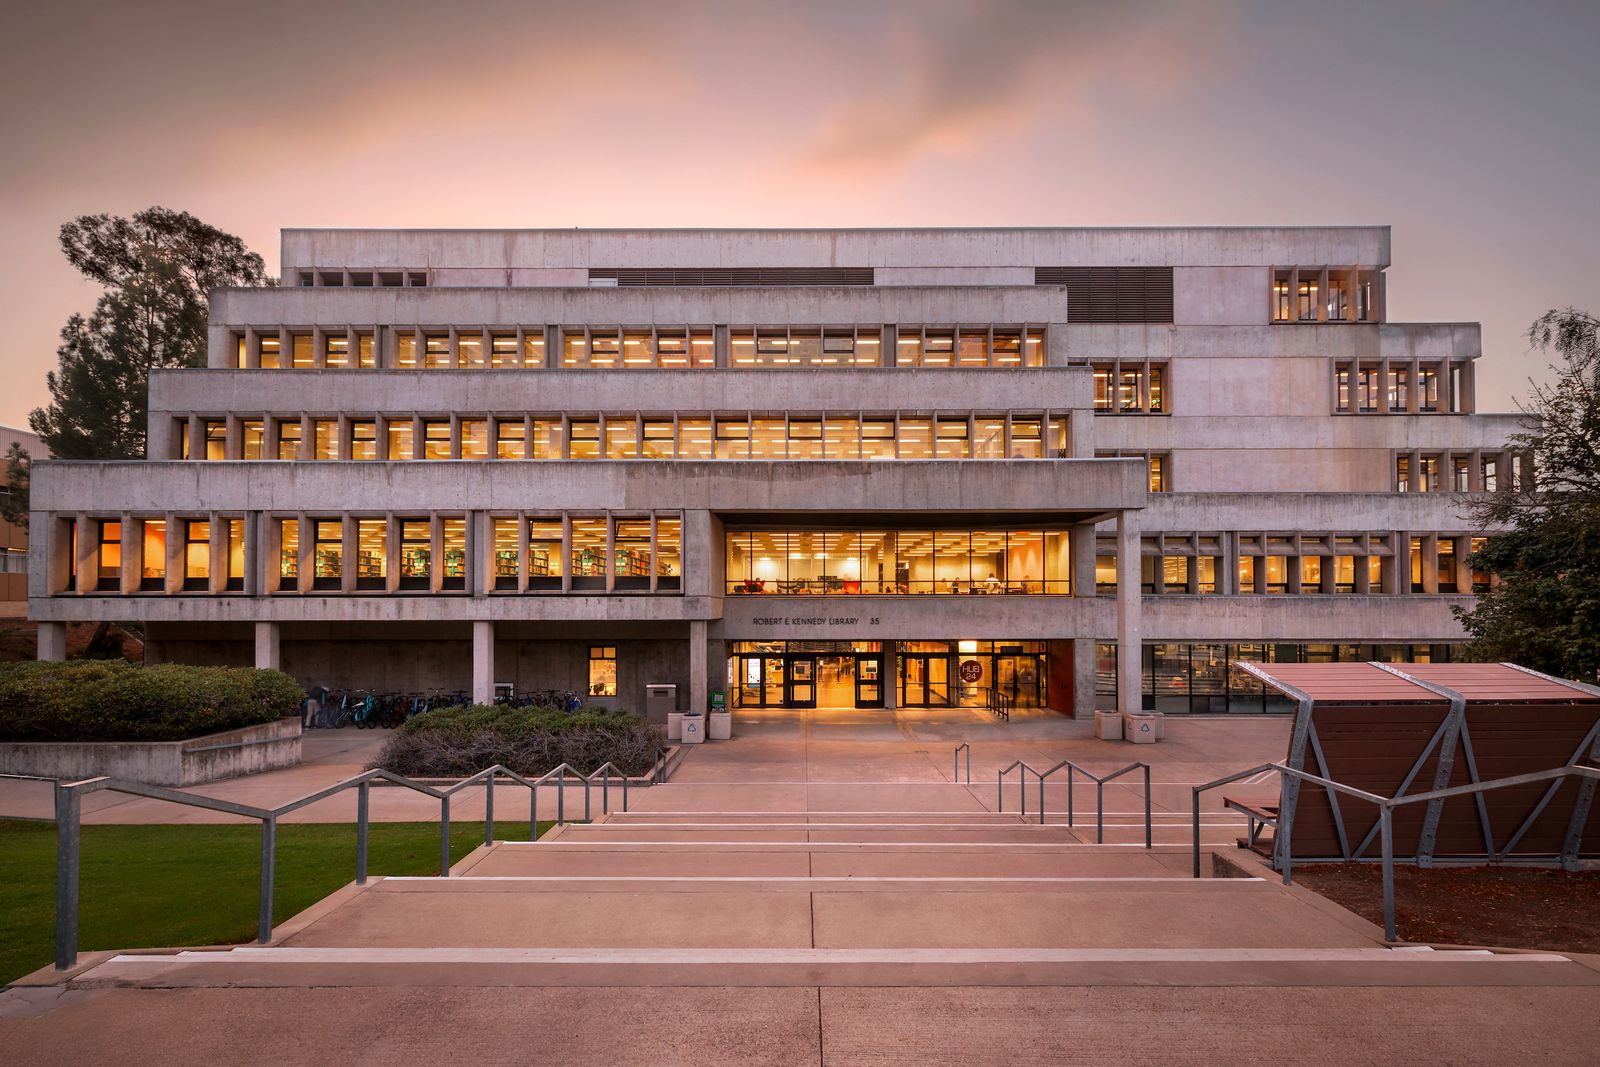 The Kennedy Library at dusk.